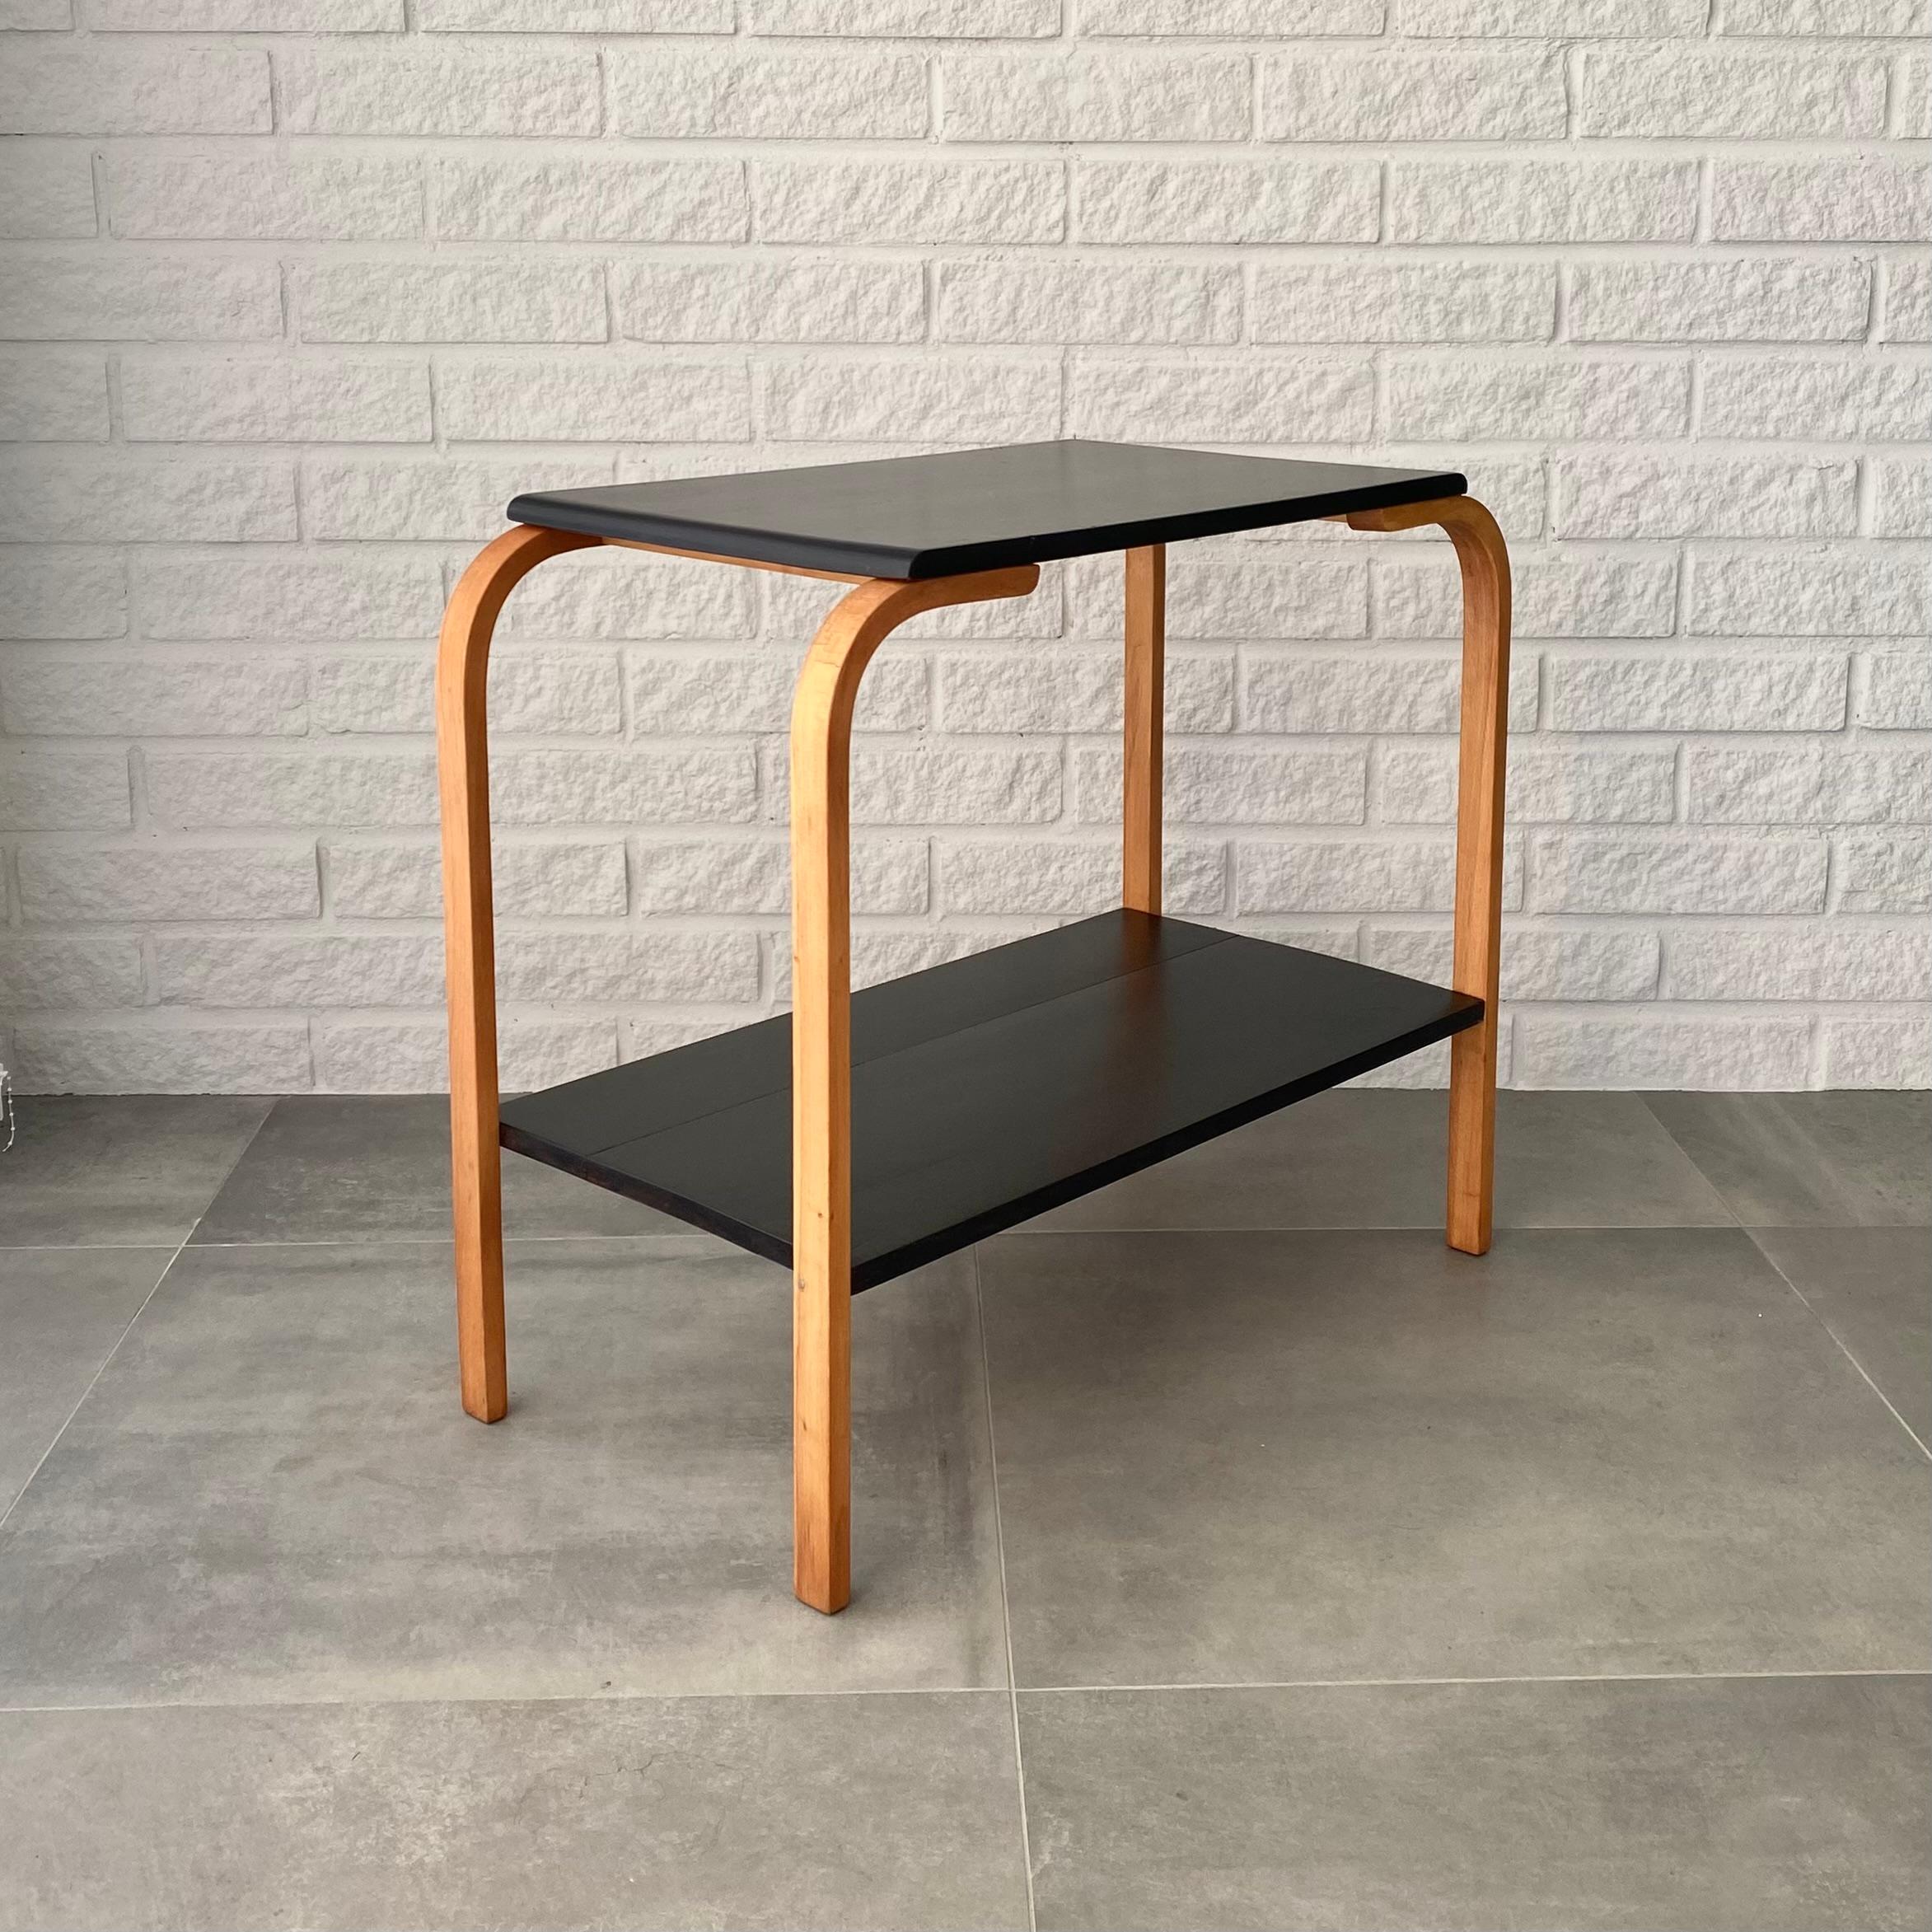 Rectangular side table with four bentwood legs made from solid beech, black tabletop and shelf. Produced in Sweden in the 1930s by Gemla Fabriker in the small community of Diö. The manufacturer Gemla was founded in 1861, and soon Bohemian craftsmen